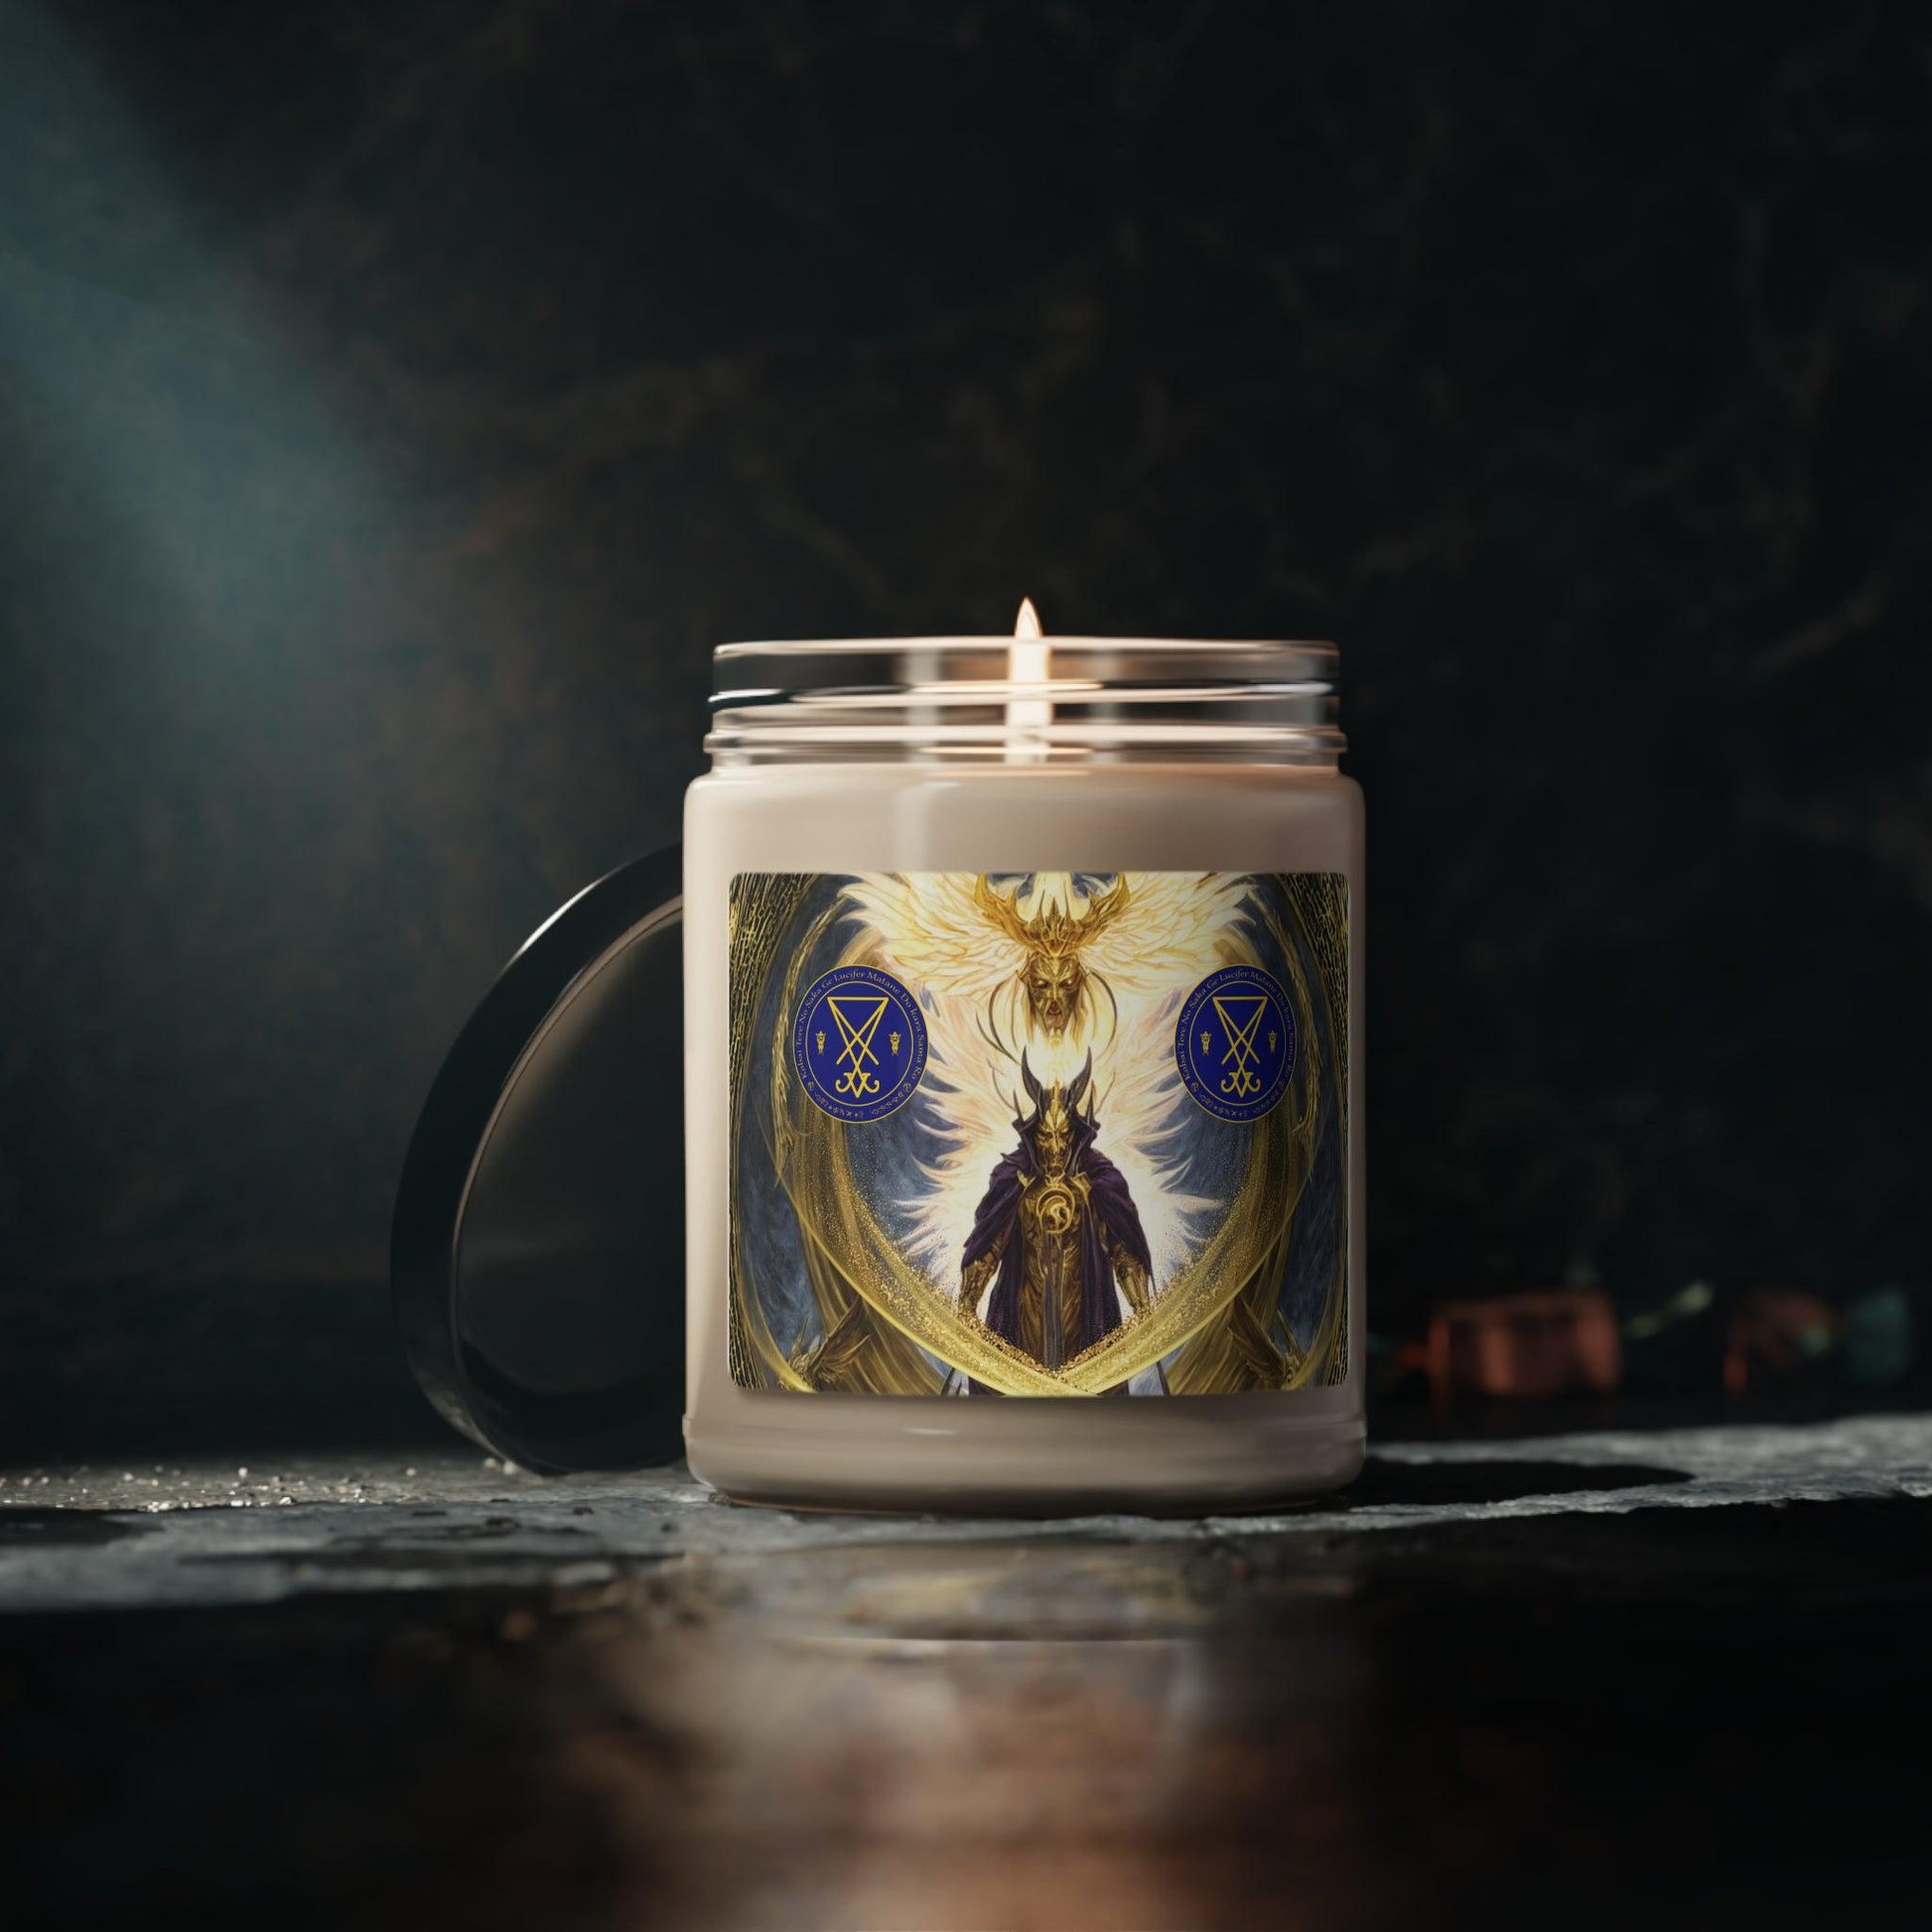 Demon-Lucifer-Scented-Soy-Candle-for-Altar-offerings-rituals-initiations-or-praying-and-meditation-25